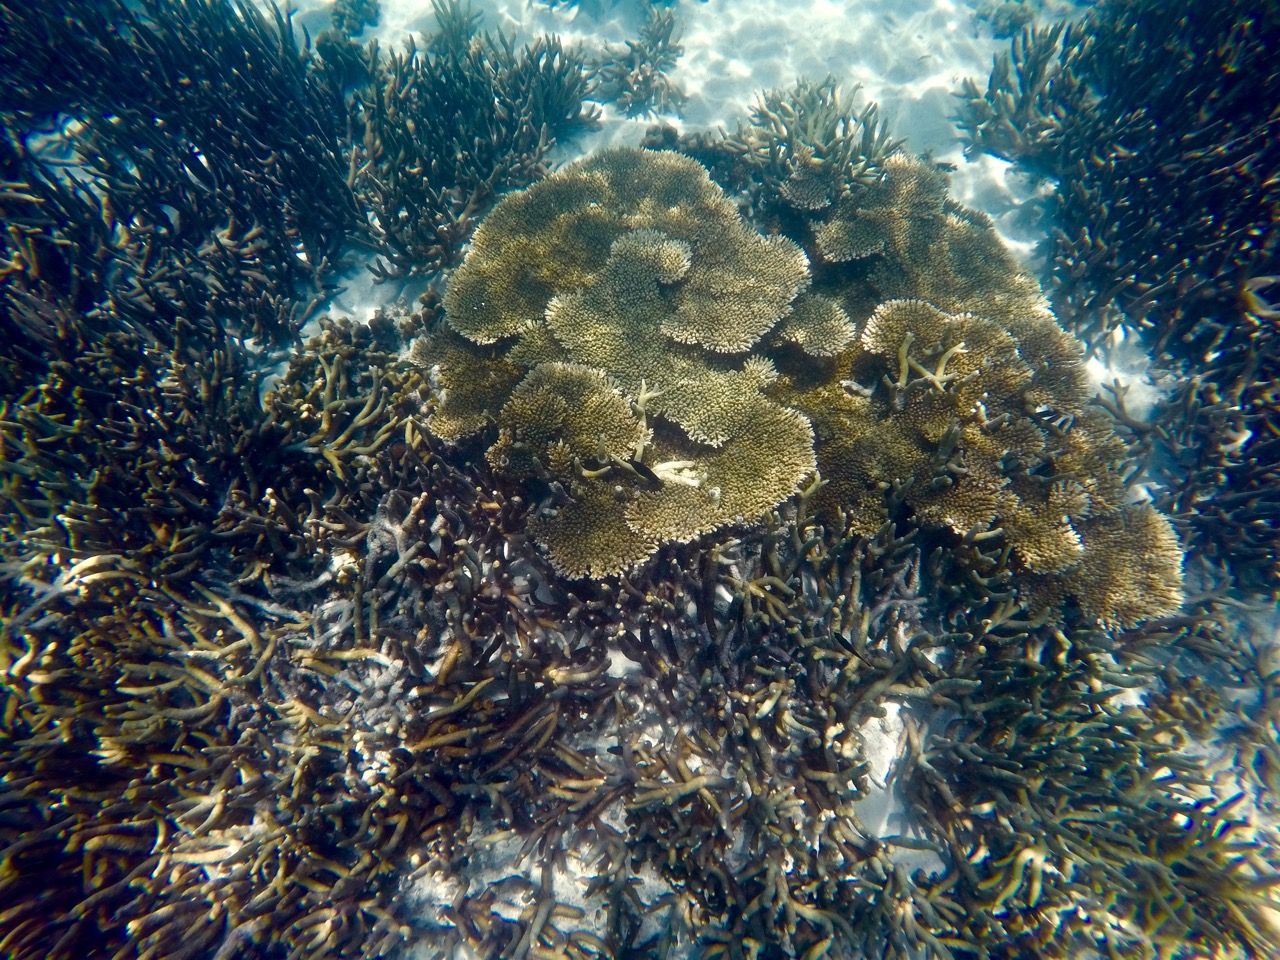 Coral in shallow water.